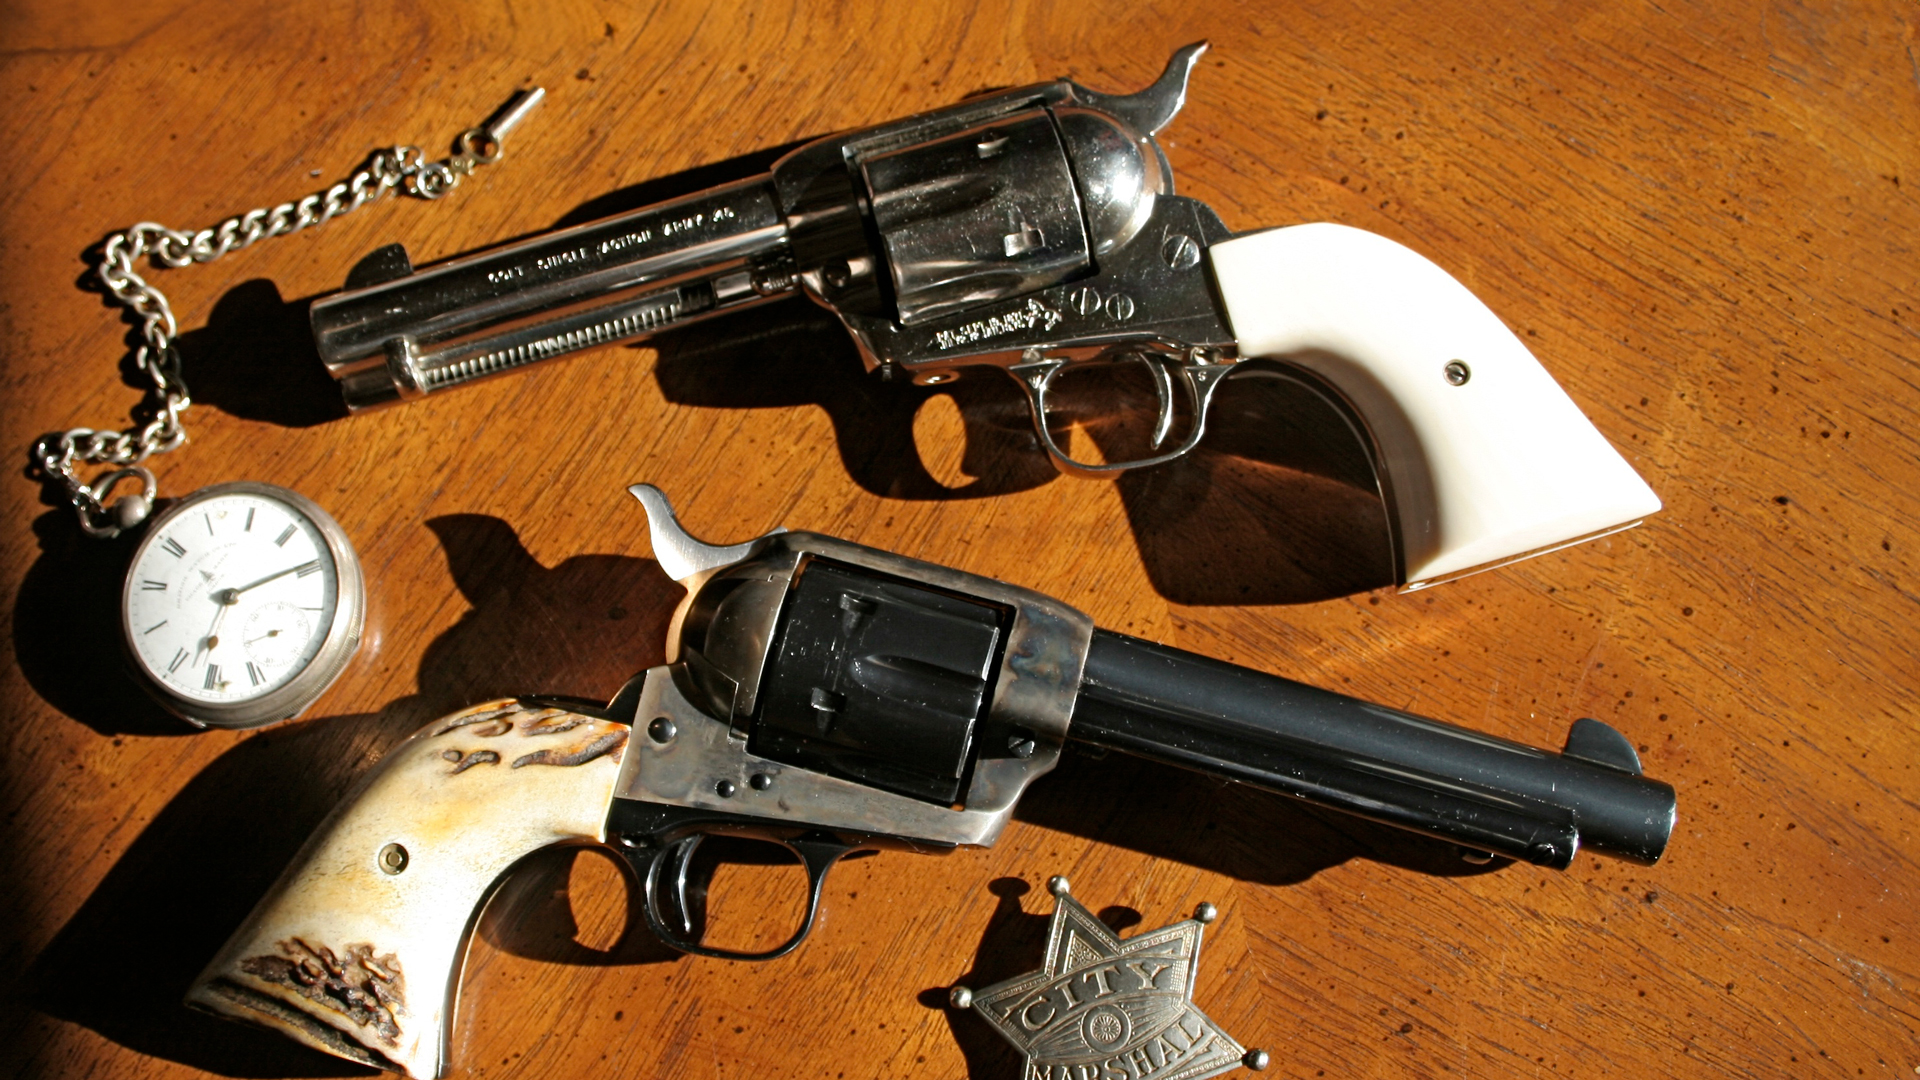 Two colt single-action army revolvers on wood table shown with pocket watch and city marshal star badge